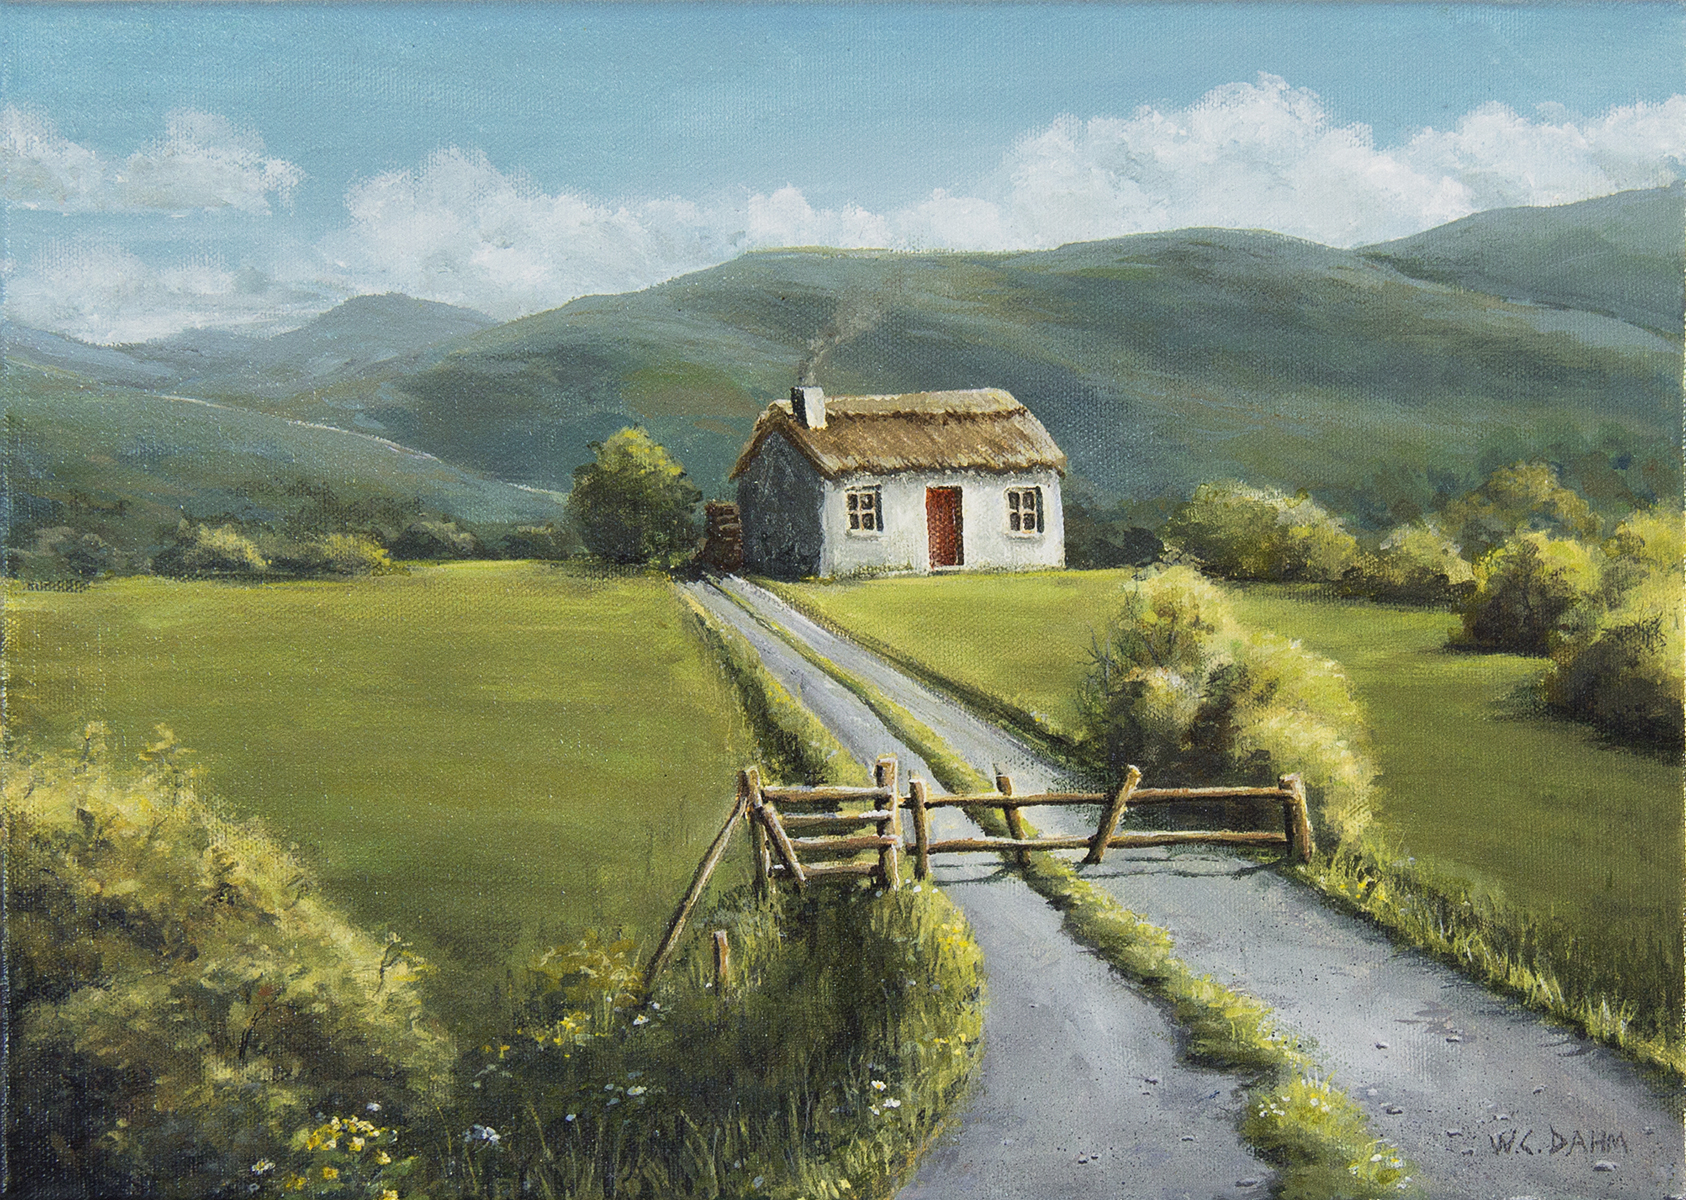 country cottage painting